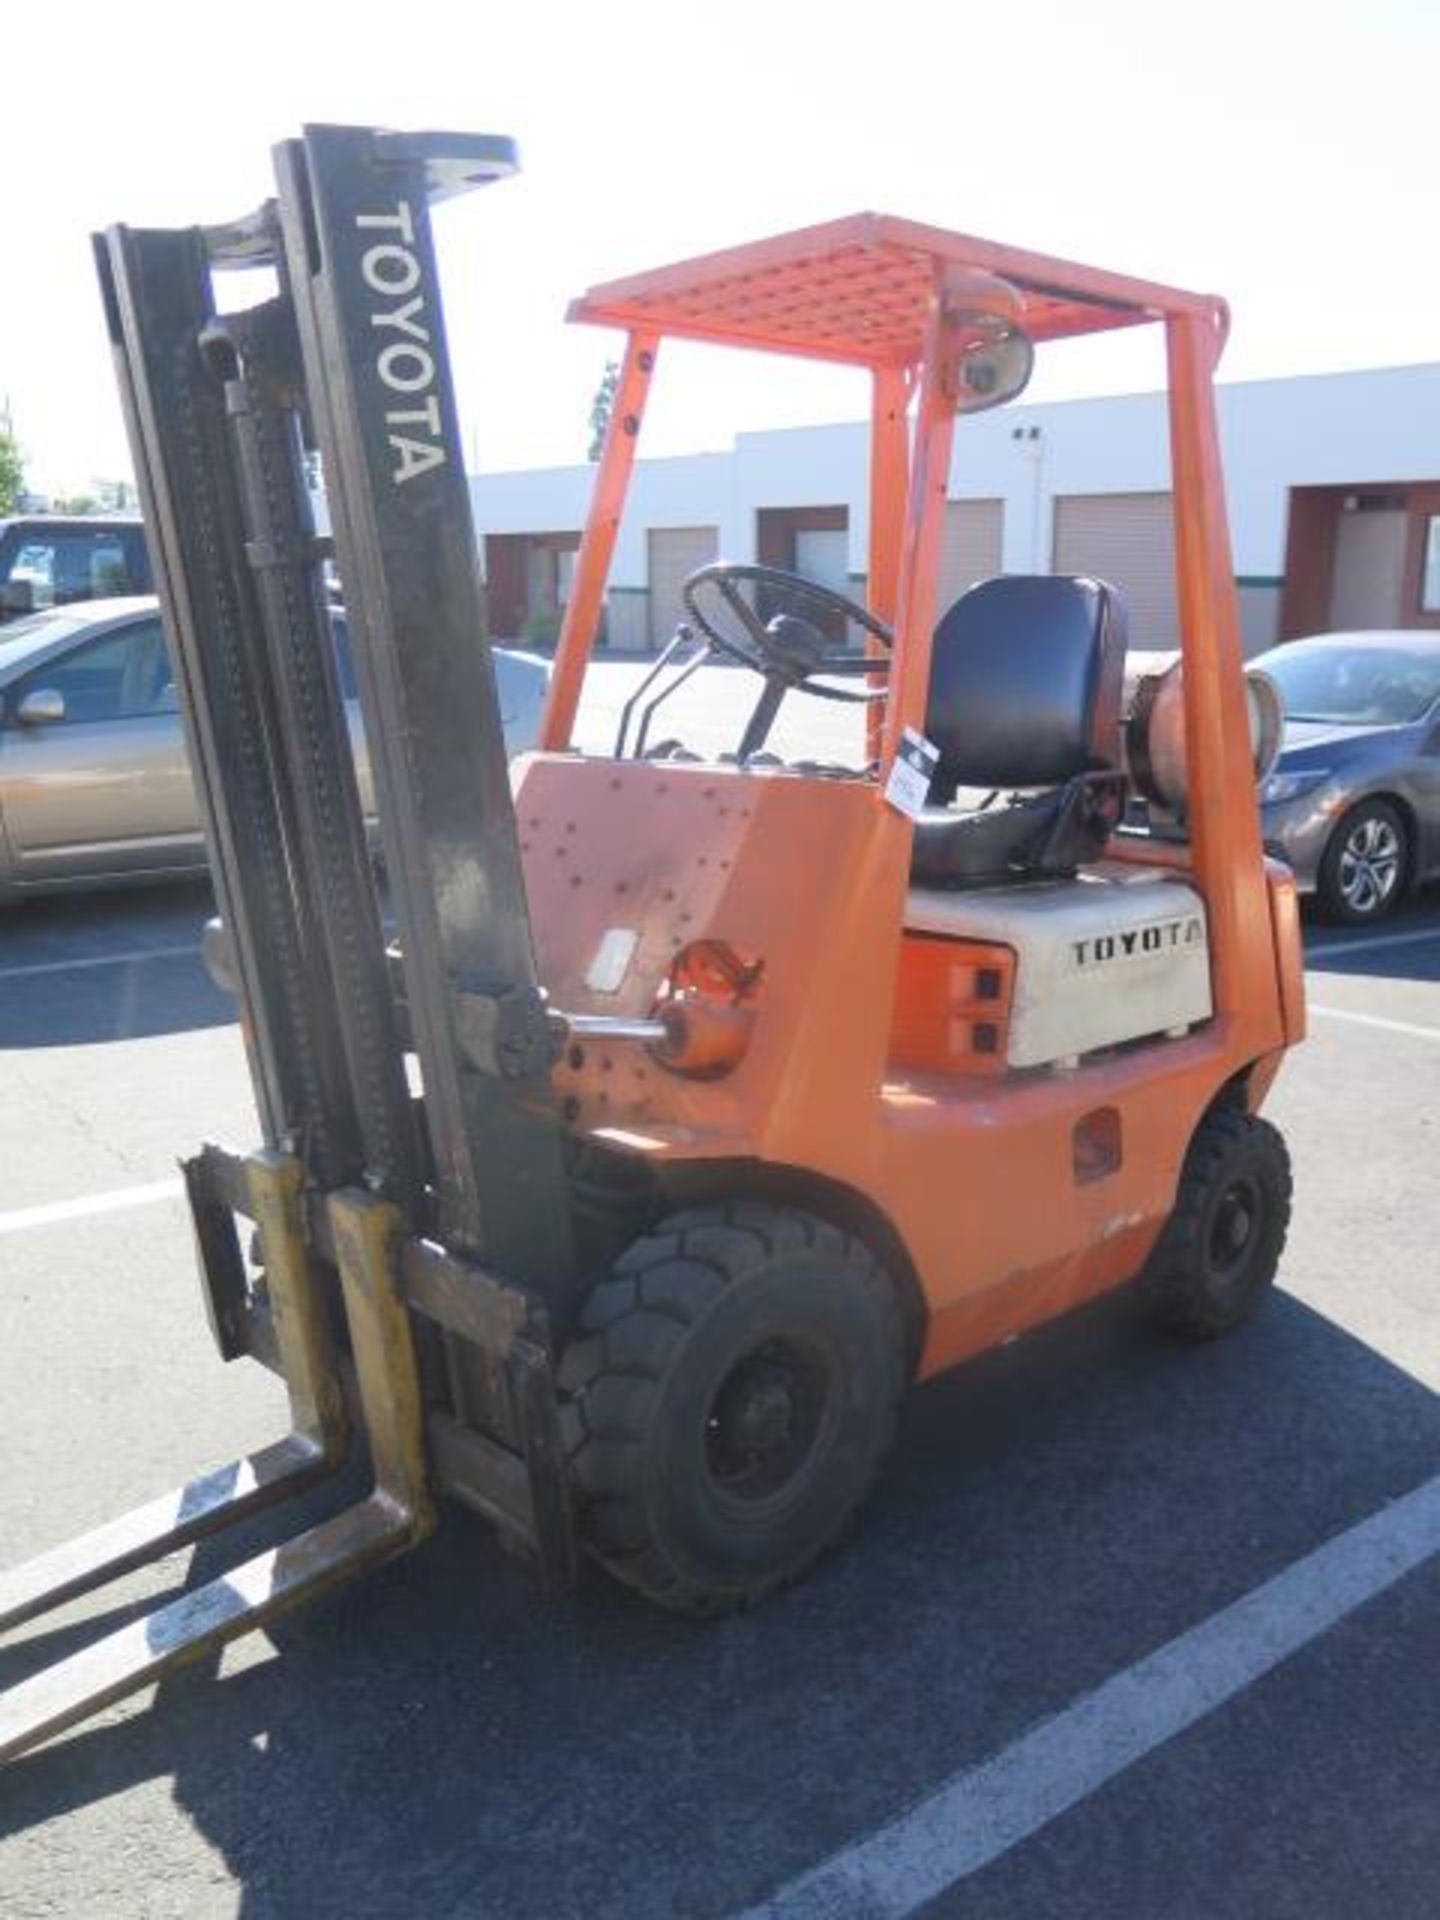 Toyota 3FGH15 3000 Lb Cap LPG Forklift s/n 3FGH15-10639 w/ 2-Stage Mast, Pneumatic Yard SOLD AS IS - Image 5 of 15